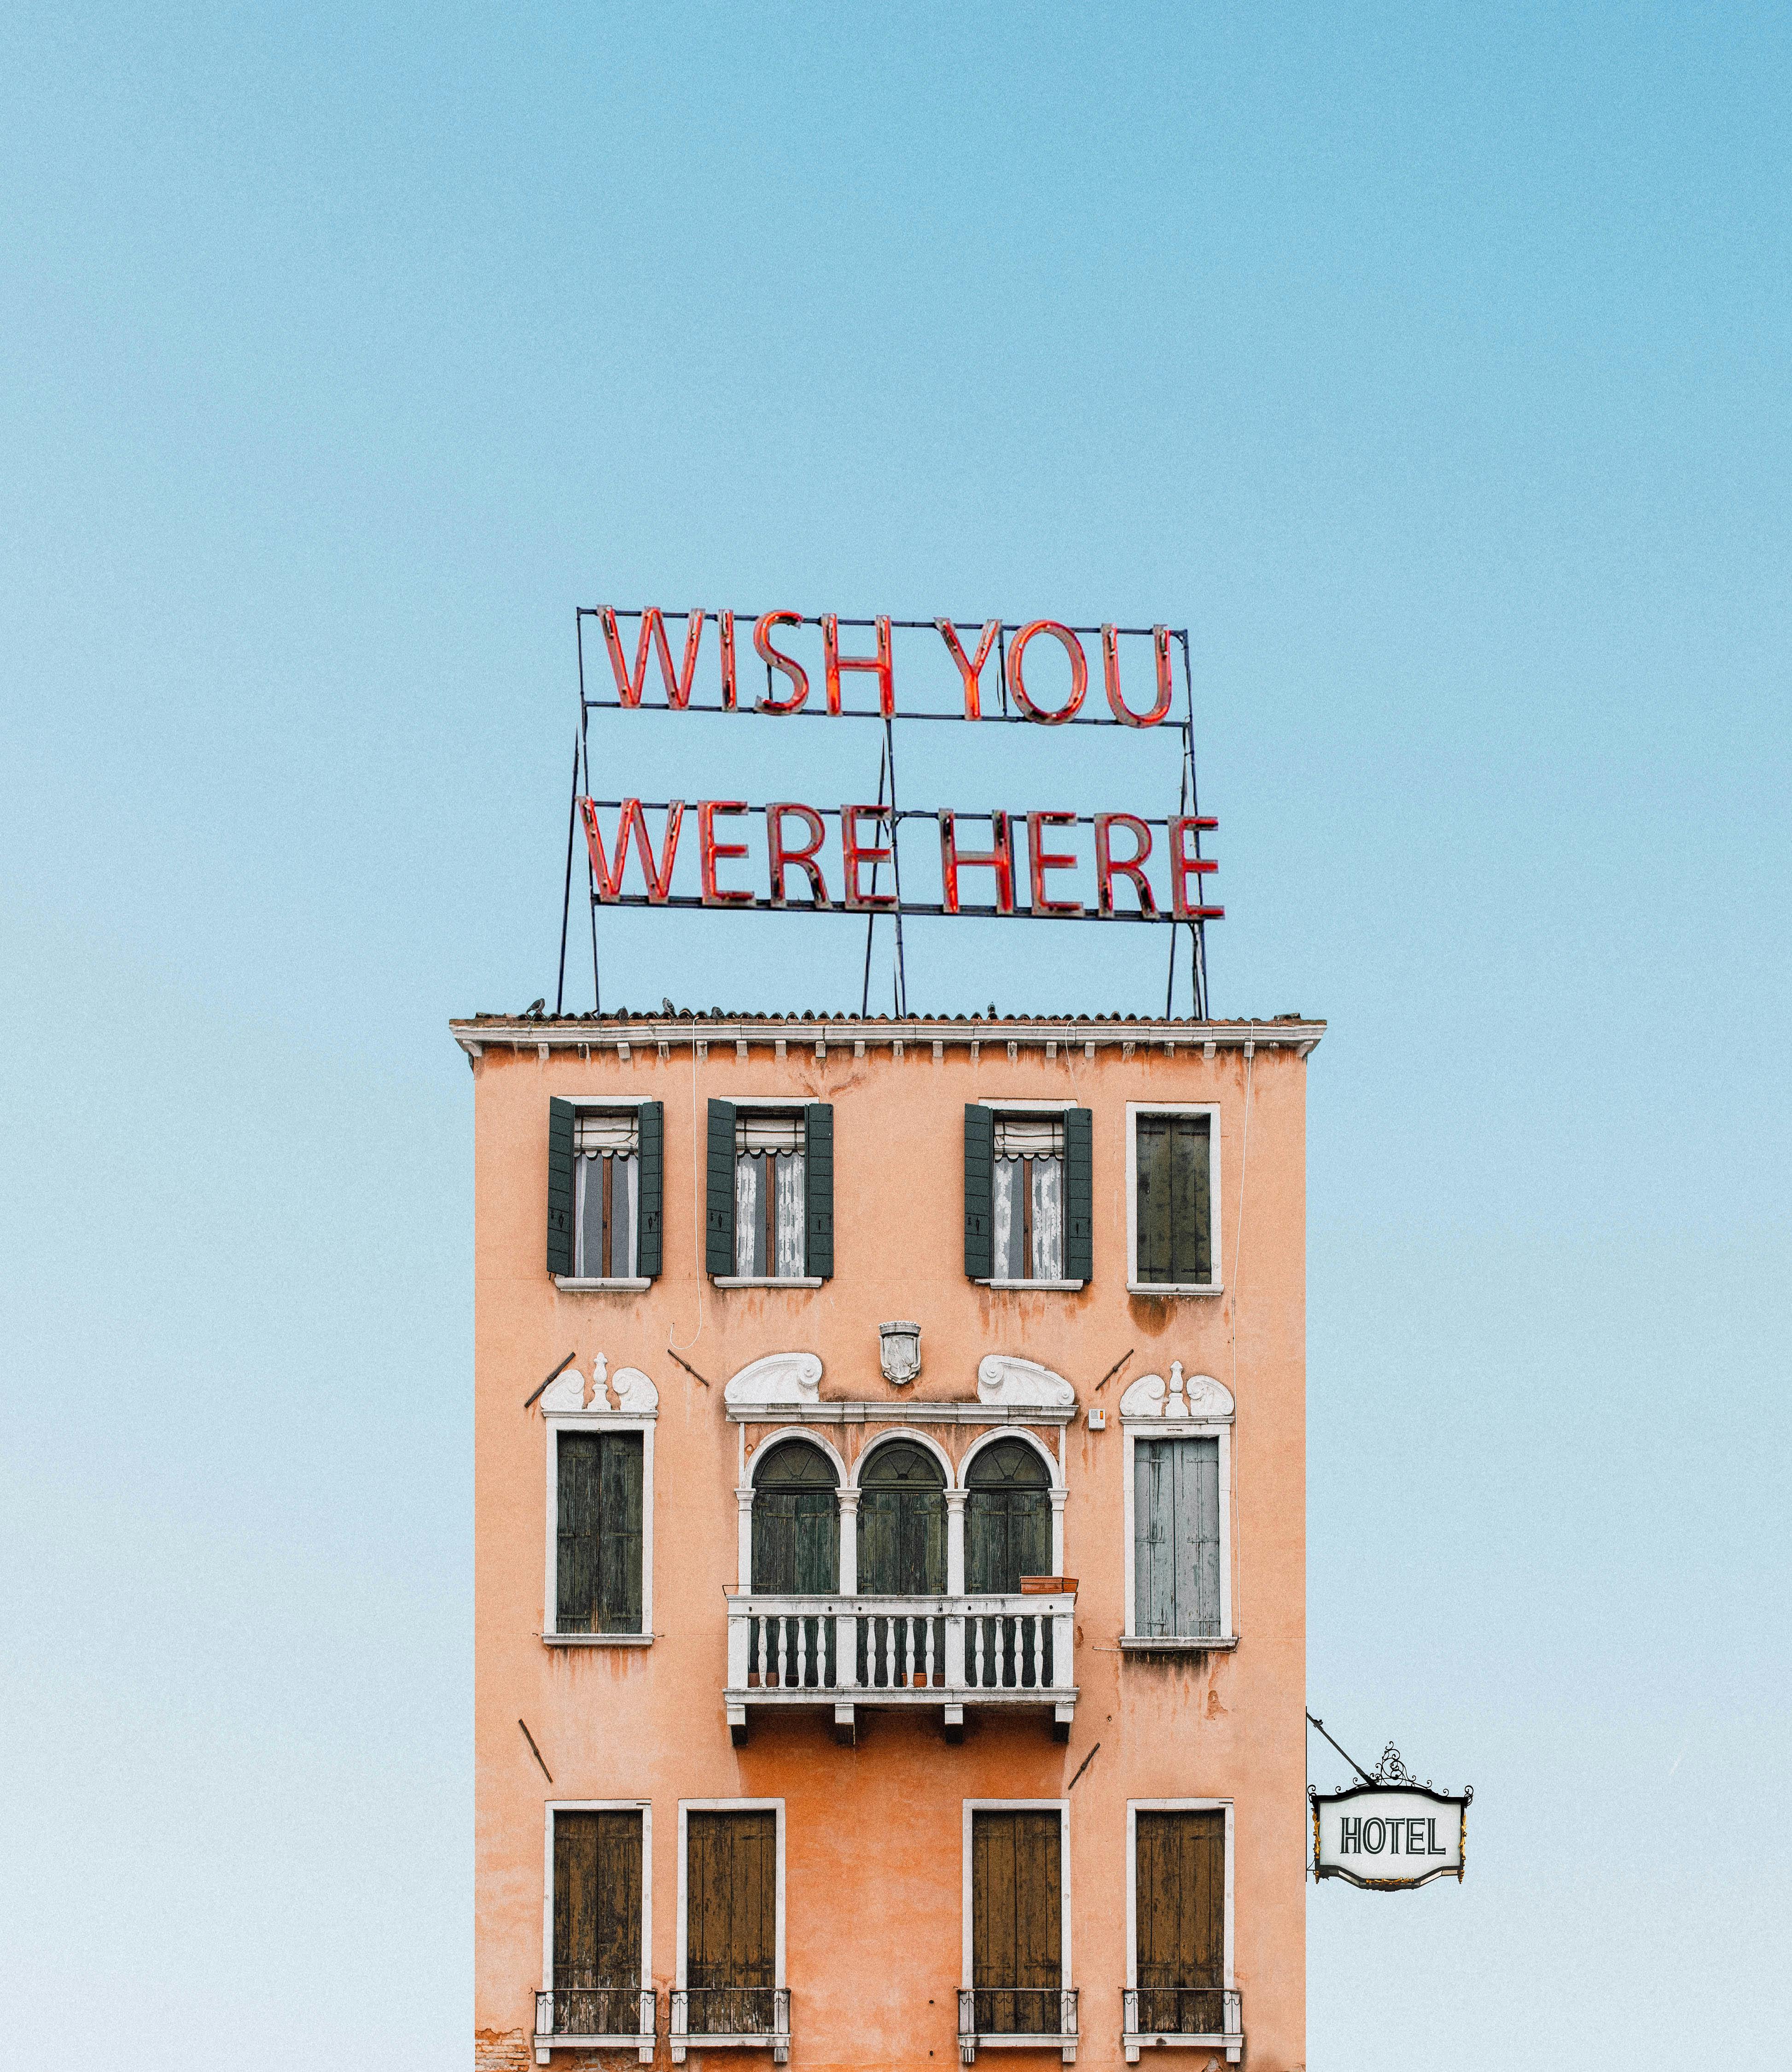 A Hotel Sign. (​ Photo by Gratisography on​ ​ Pexels.com​ )